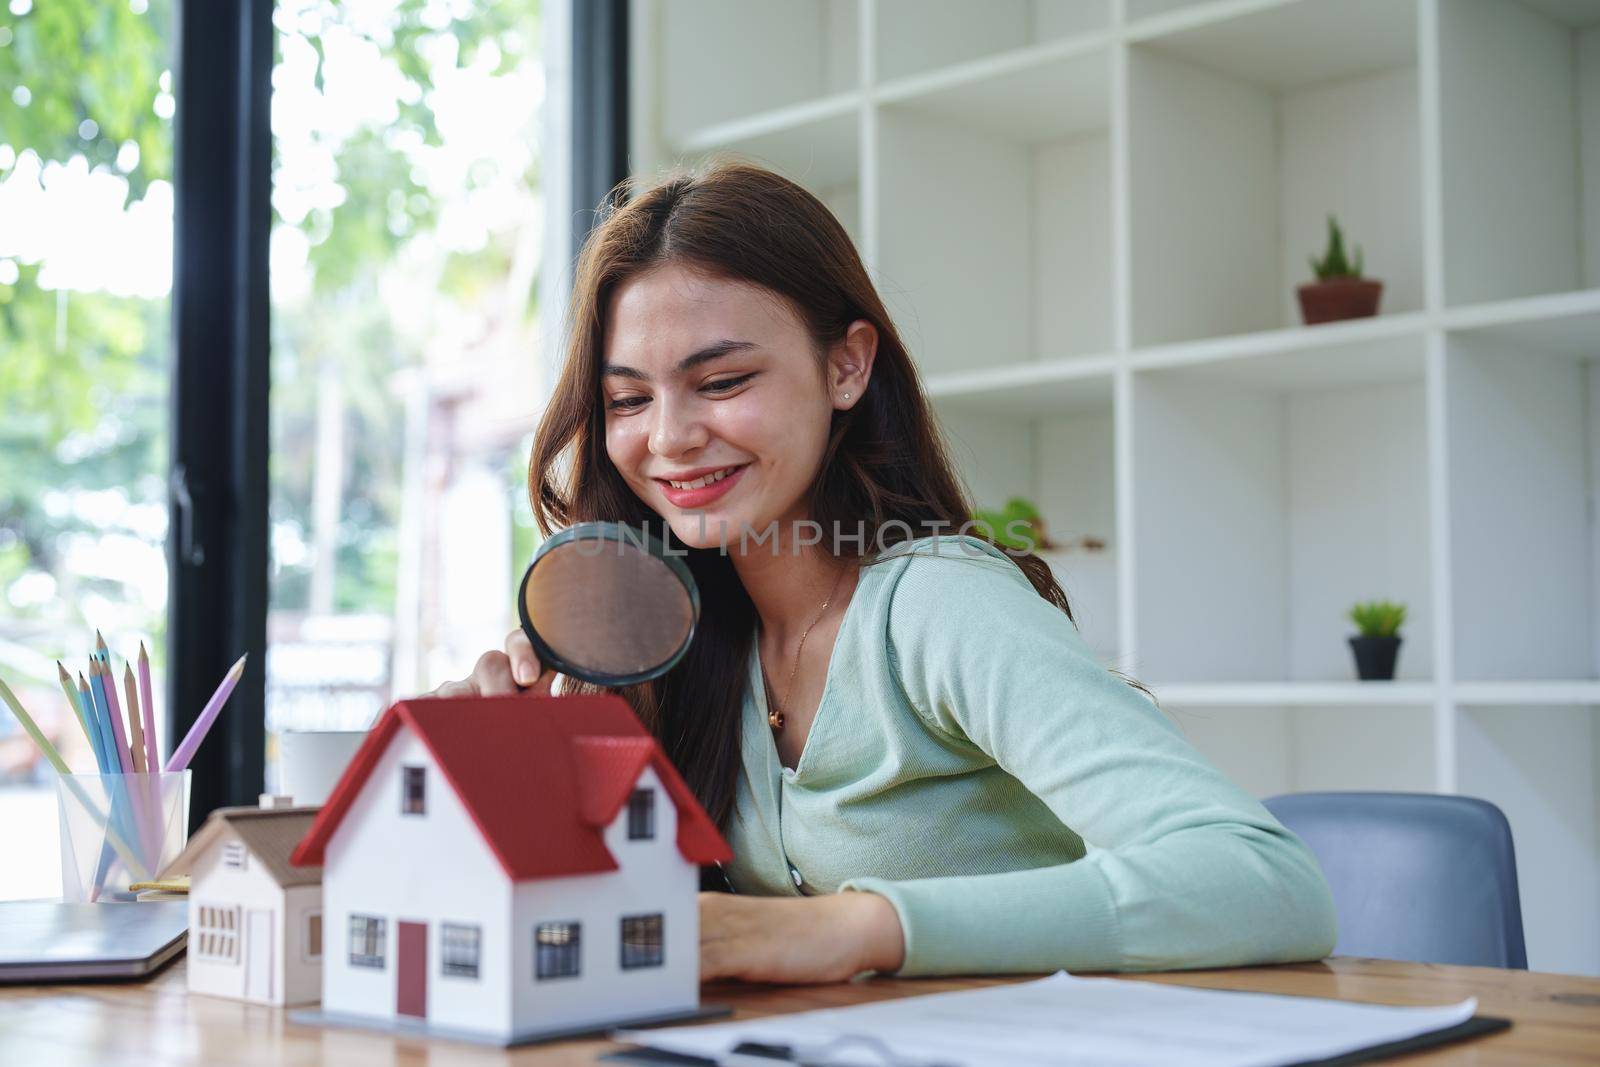 The client holds a magnifying glass to select a house model, inspect the concept of a home before making a decision to invest, make a loan, get insurance and sign important documents with the bank